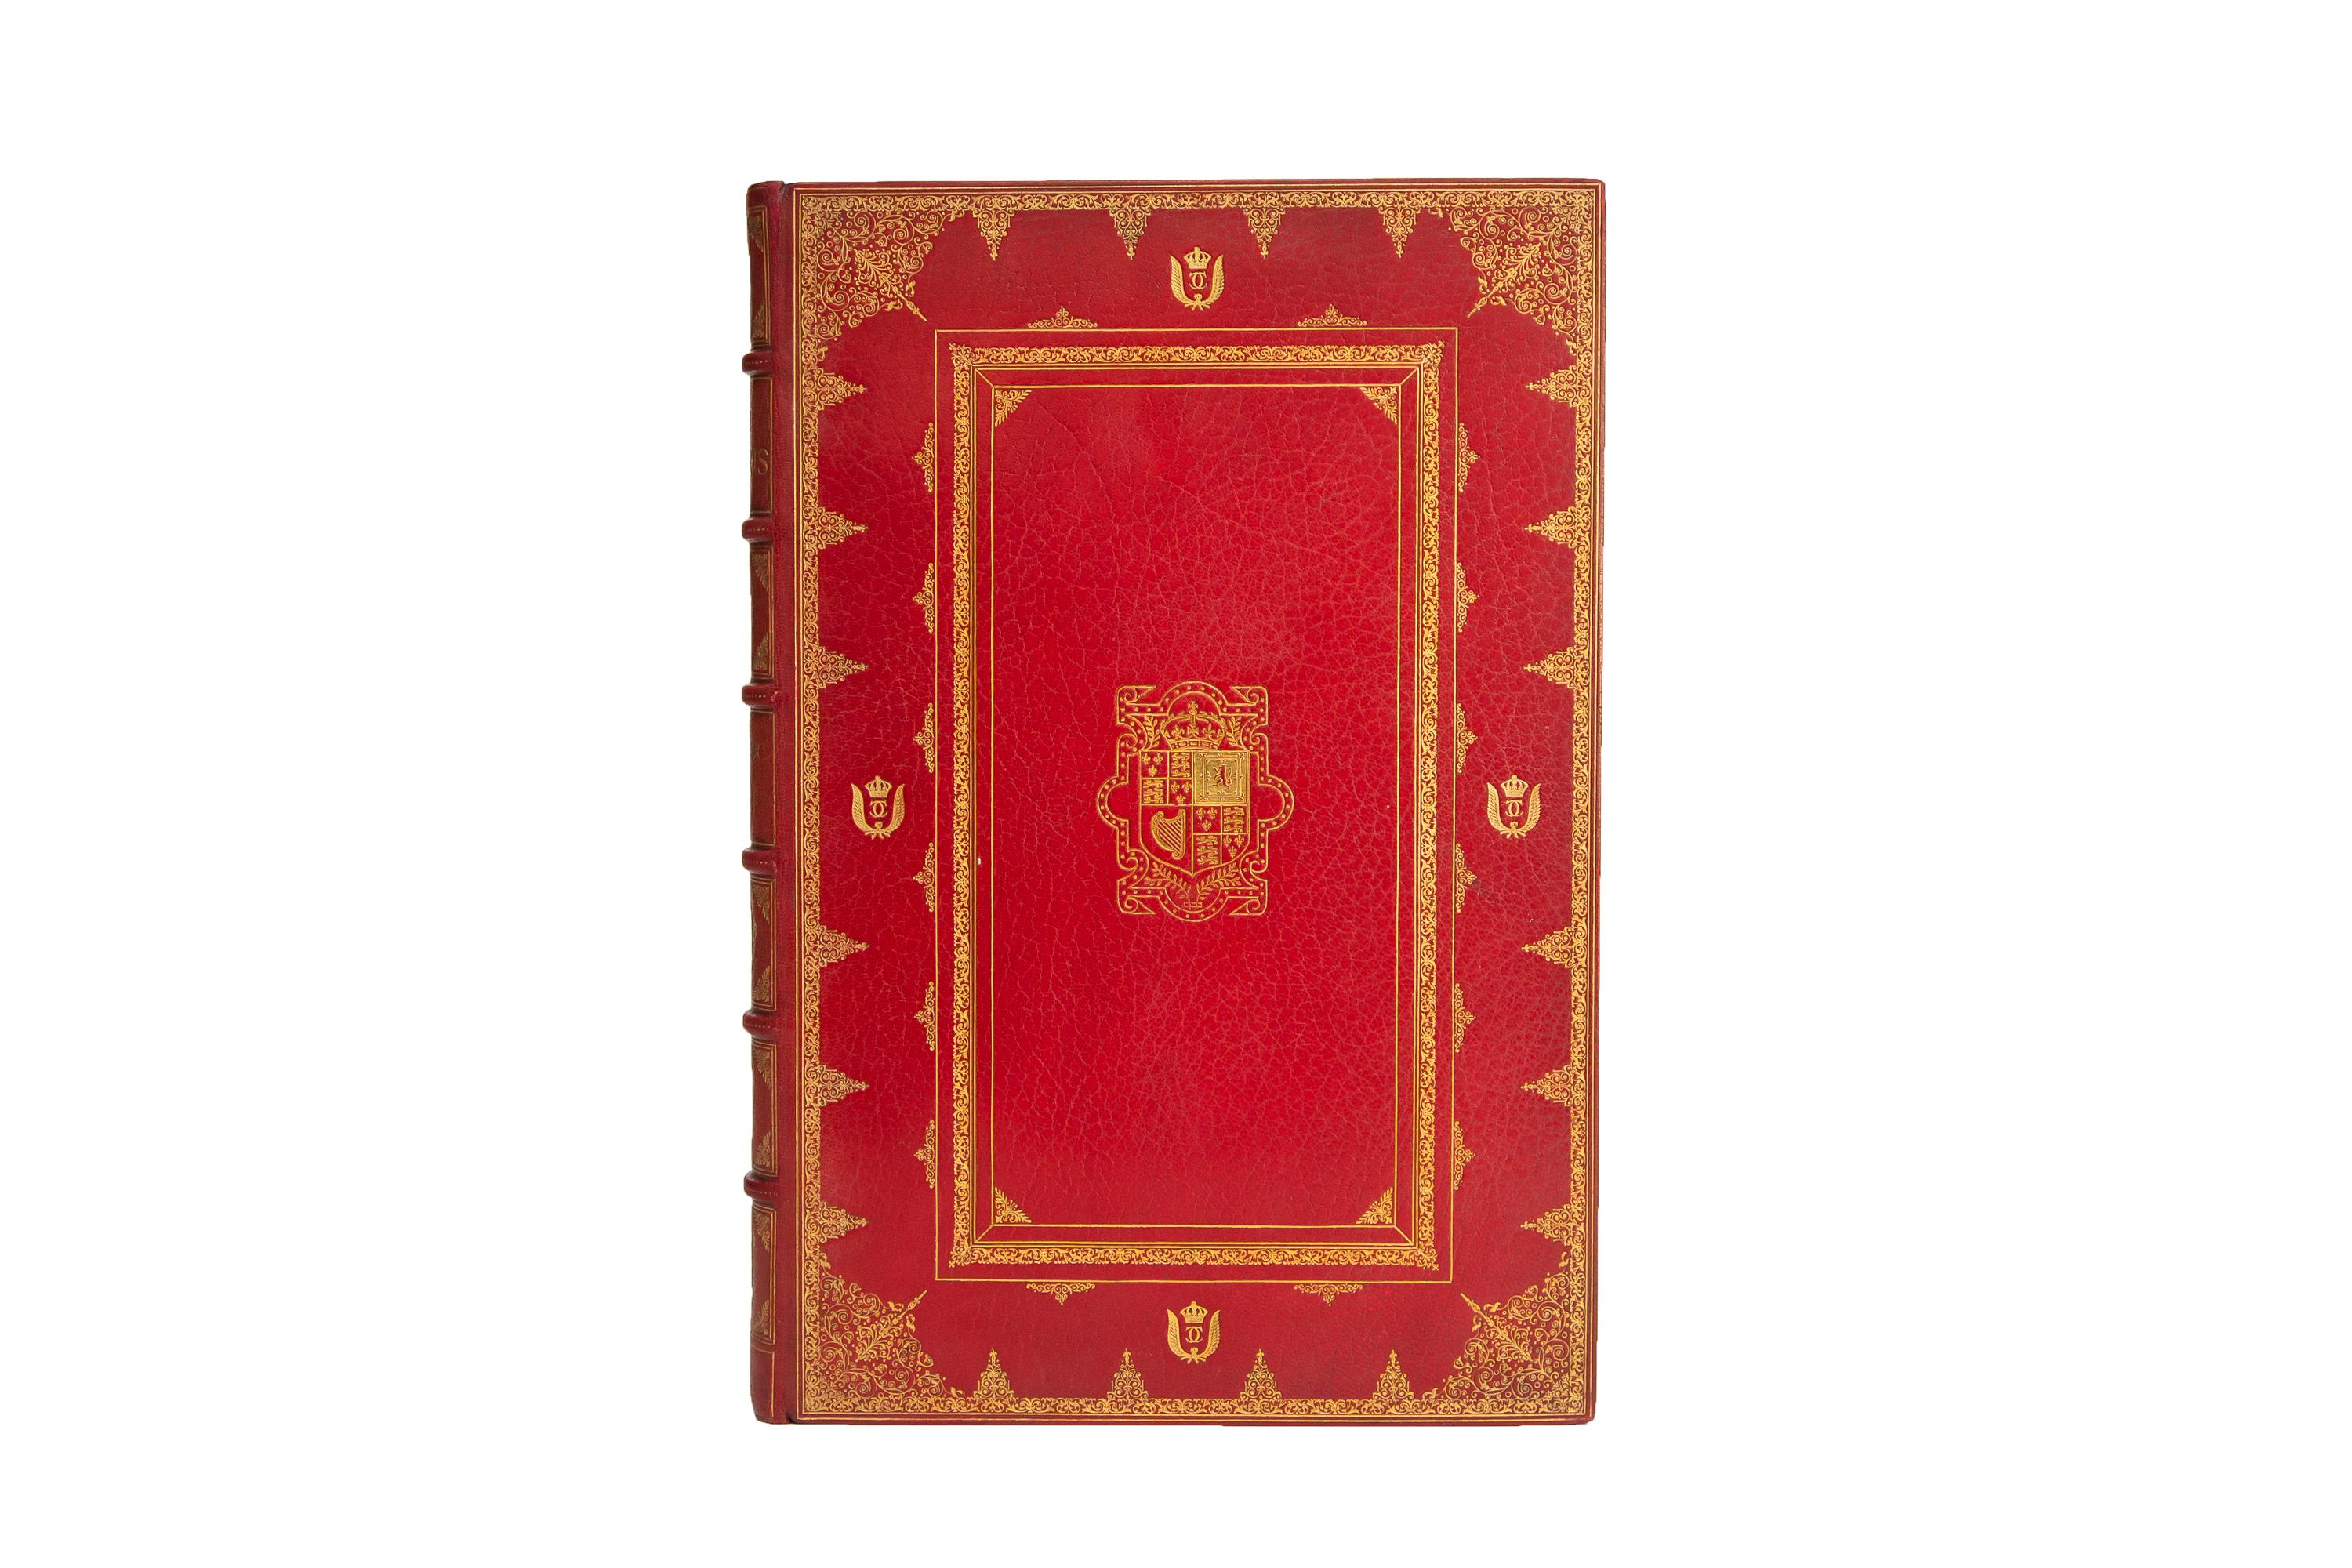 2 Volumes. J.J. Foster, The Stuarts. Limited edition. Bound in full red morocco with covers displaying ornate gilt tooling on the borders and central familial crests. Raised bands gilt with panels displaying ornate royal gilt tooling and label